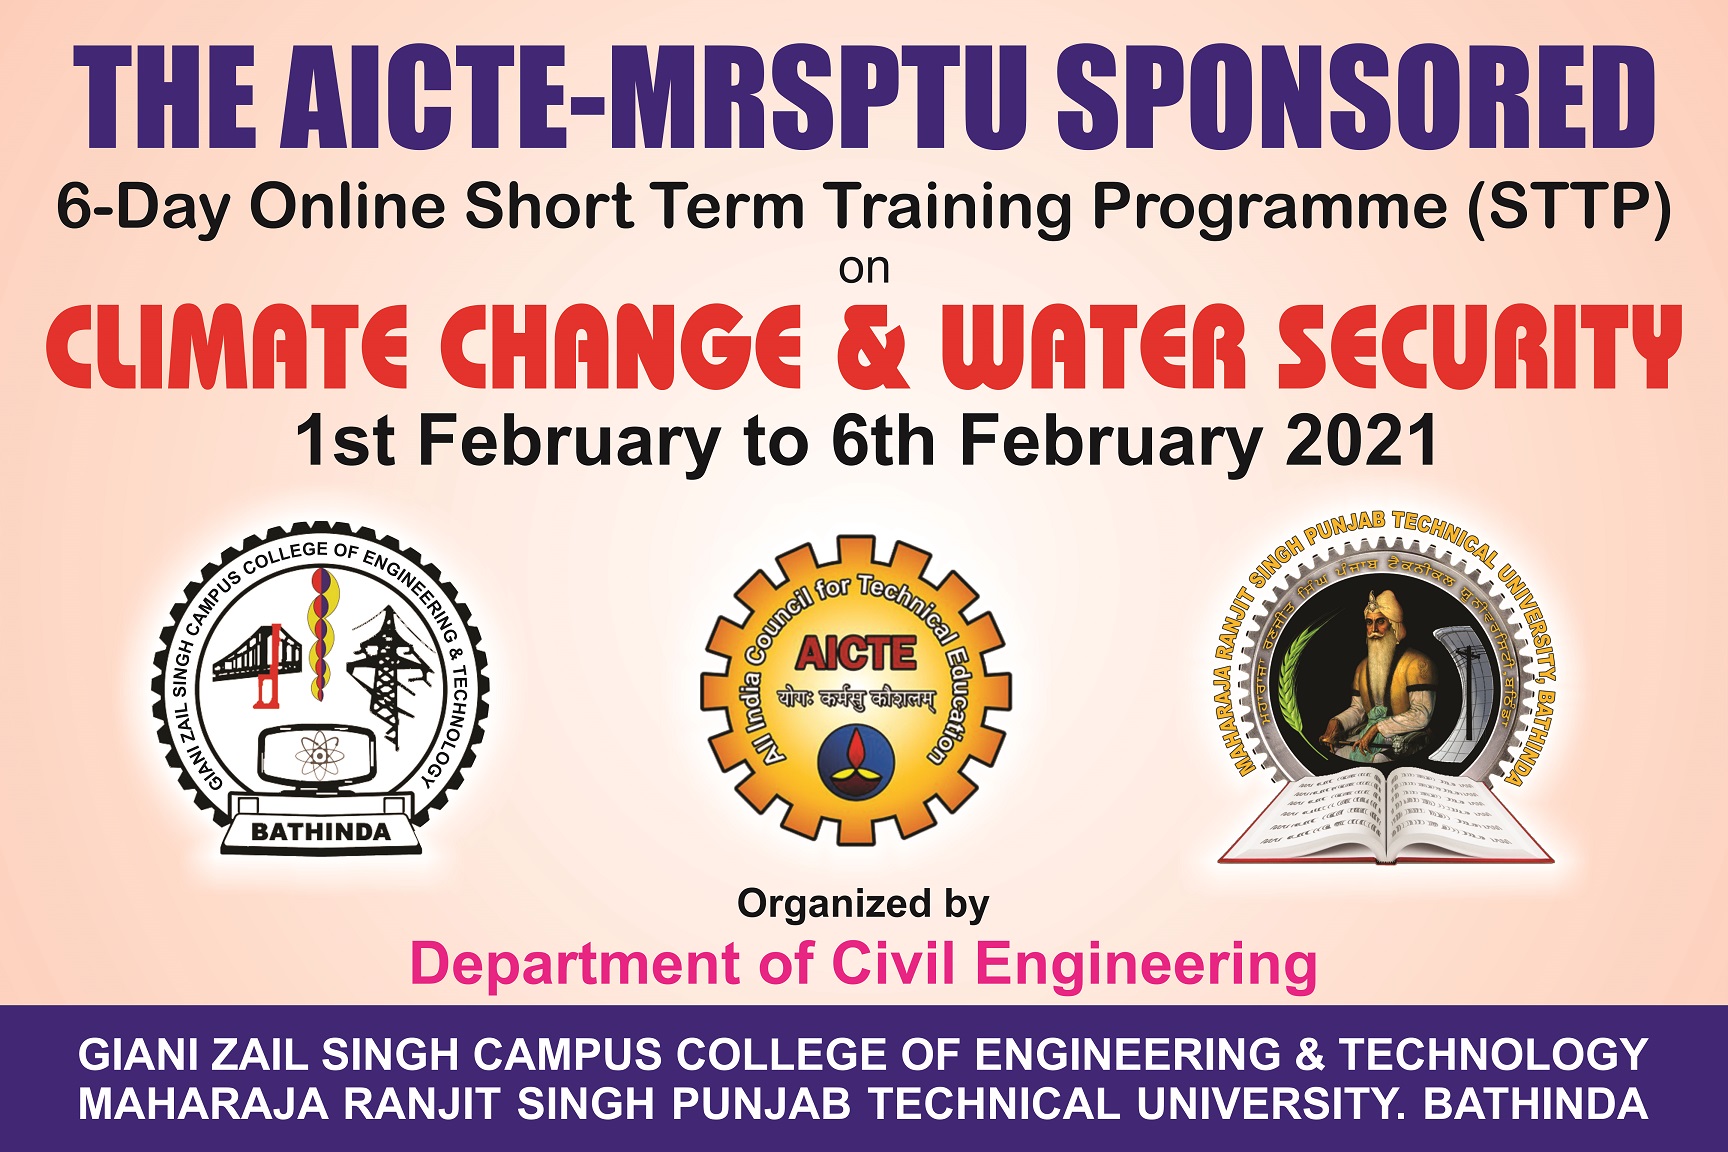 The AICTE-MRSPTU 6-Day Short Term Training Programme (STTP) on Climate Change & Water Security being organized by the Civil Engineering Department ended here on 06th February 2021